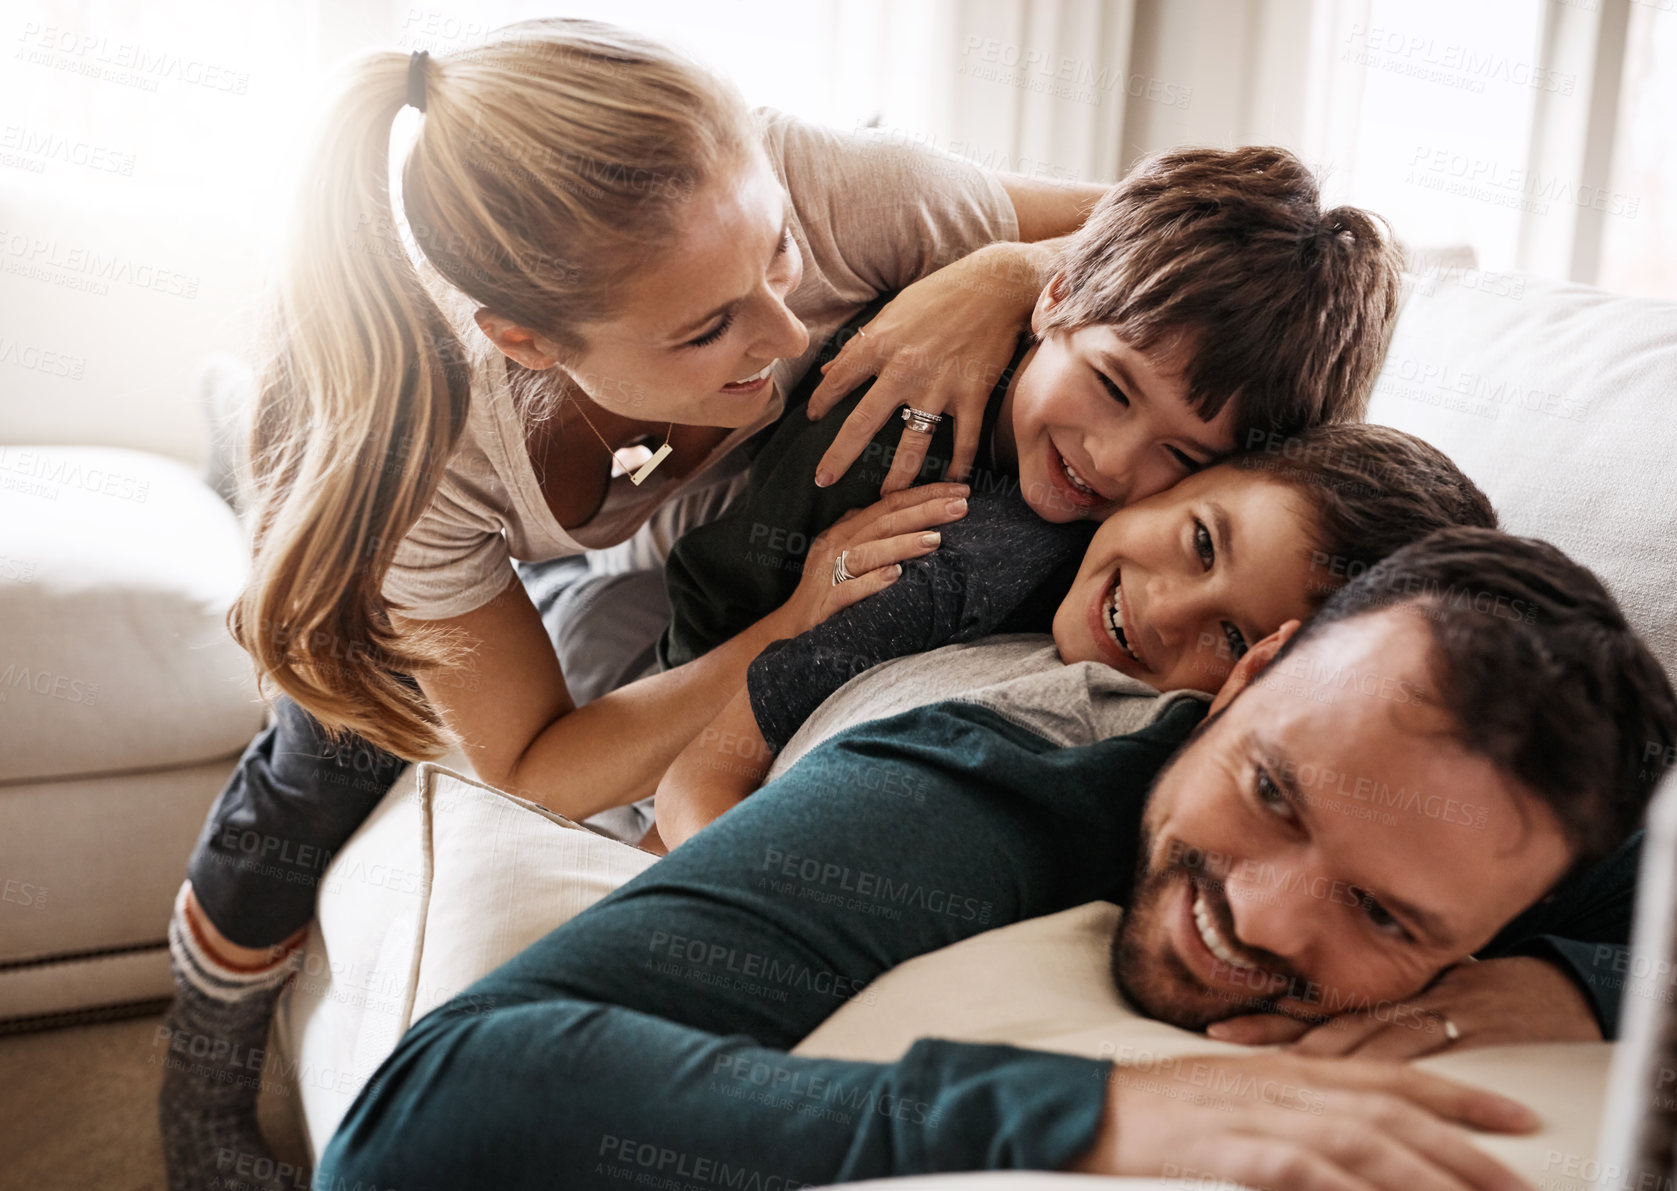 Buy stock photo Shot of a happy family having fun together at home